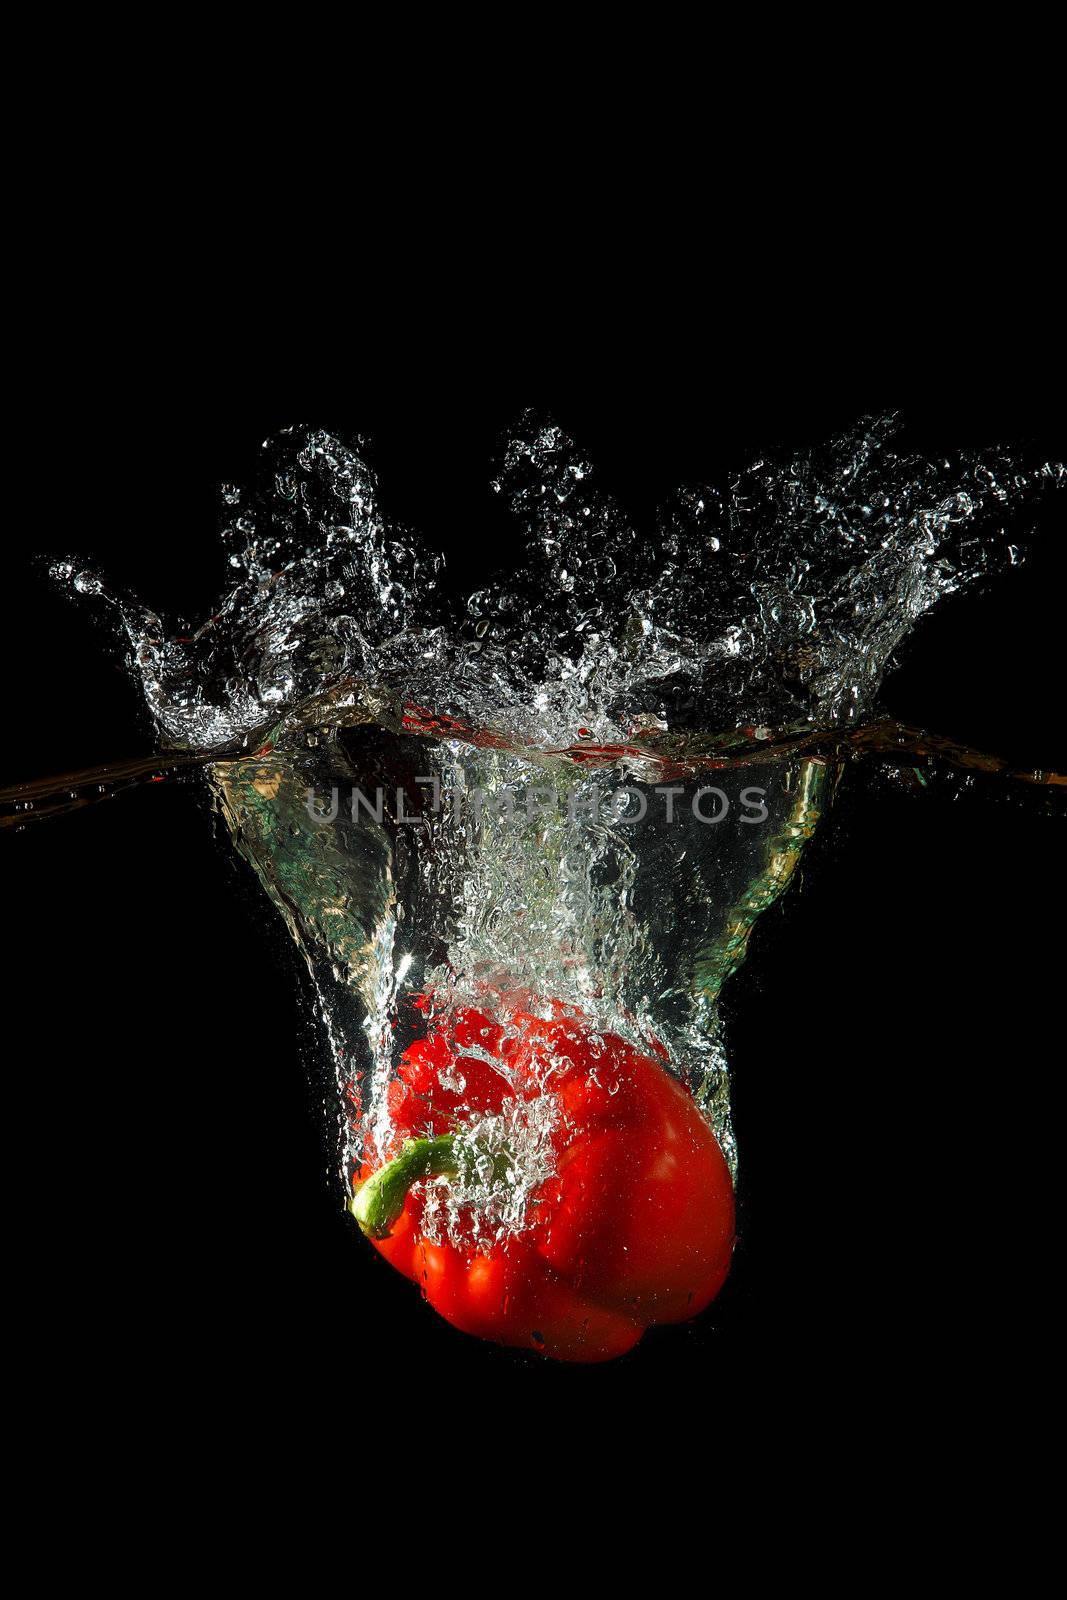 sweet red pepper by sergey_nivens